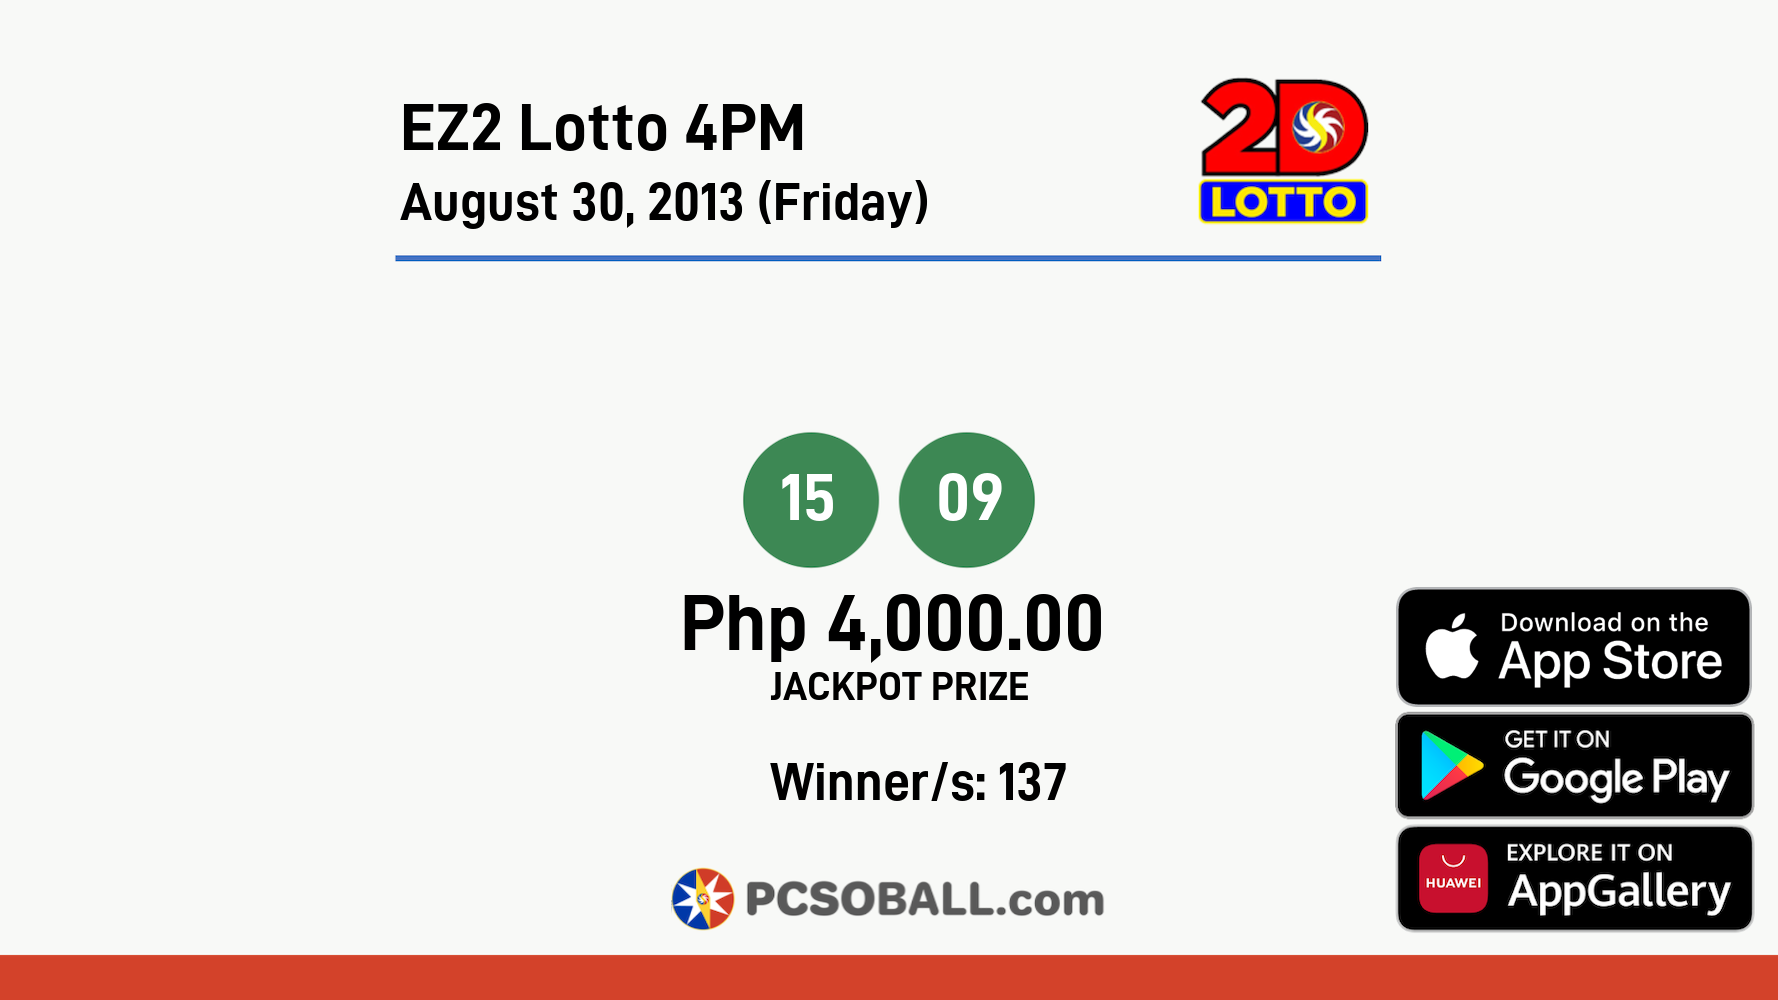 EZ2 Lotto 4PM August 30, 2013 (Friday) Result